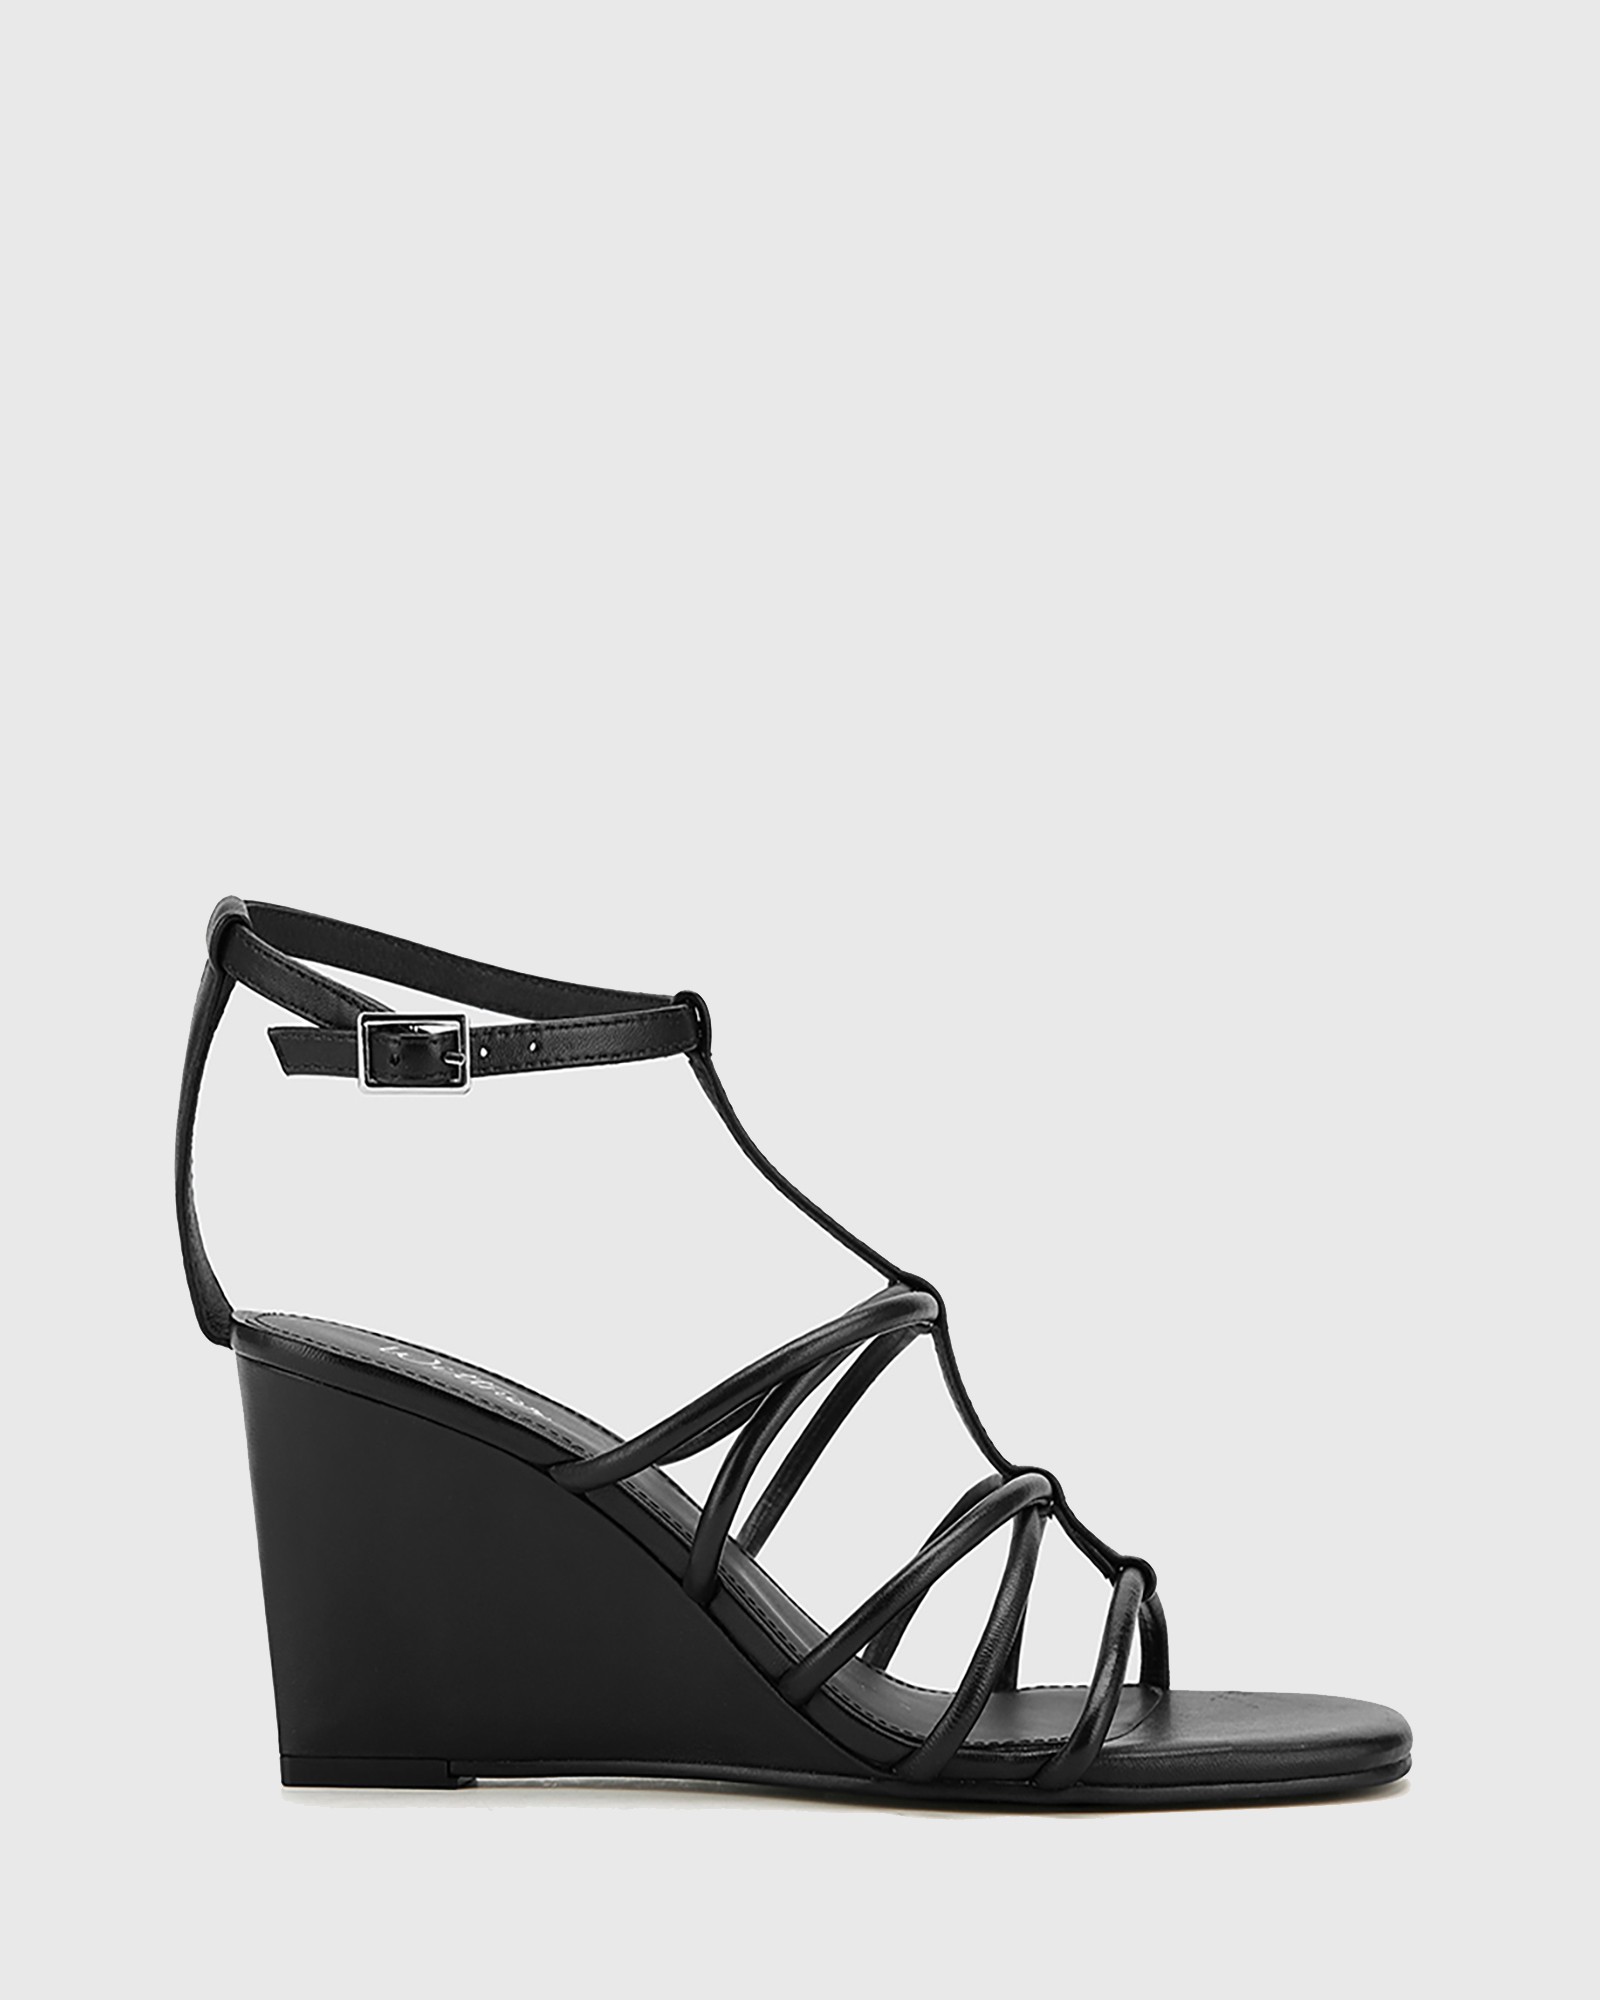 Carra Leather Open Toe Wedge Sandals Black by Wittner | ShoeSales